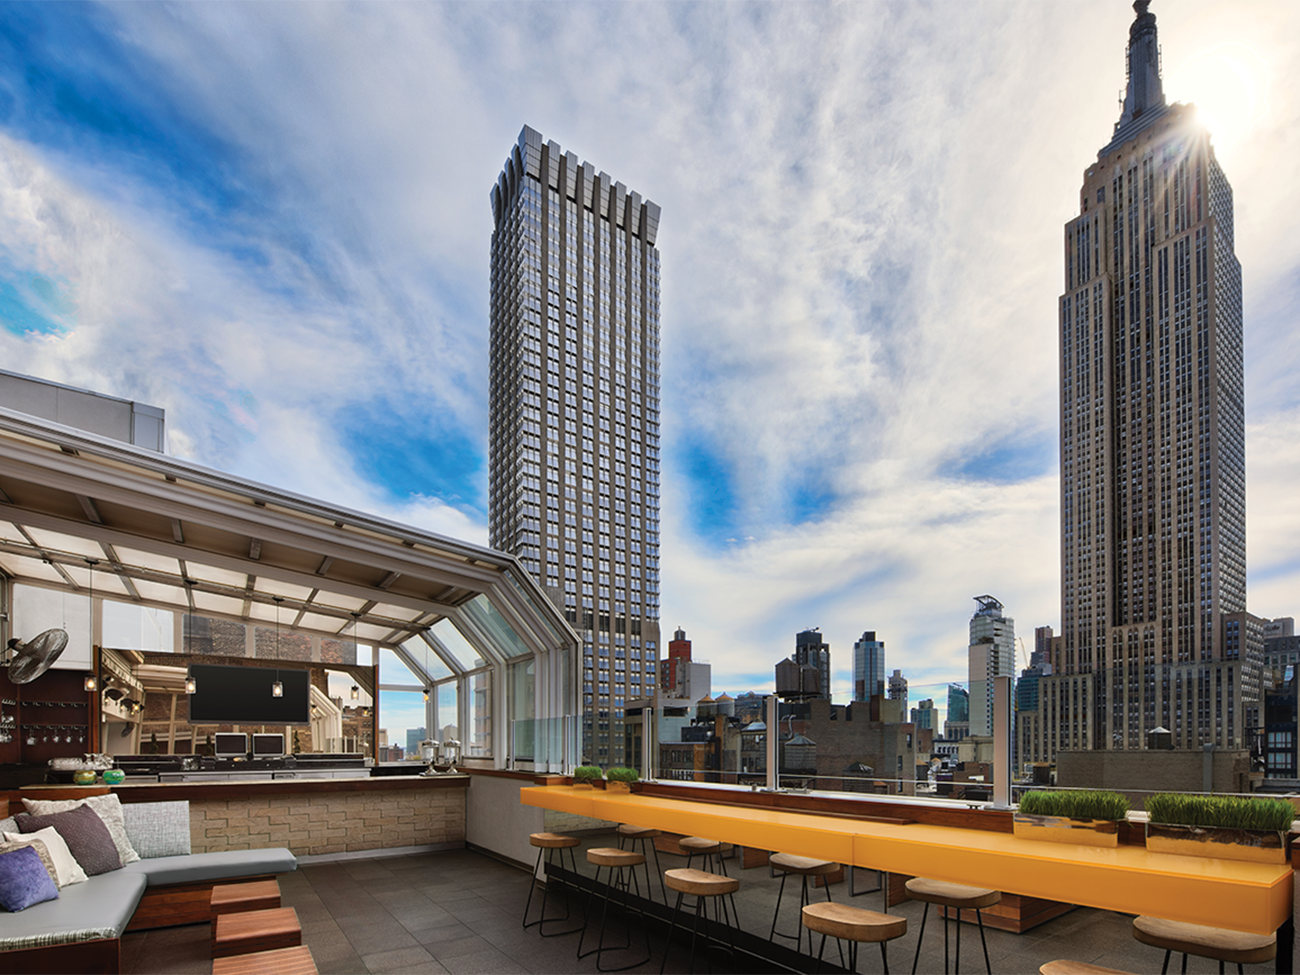 Image of Marriott Vacation Club®, New York City in New York City.